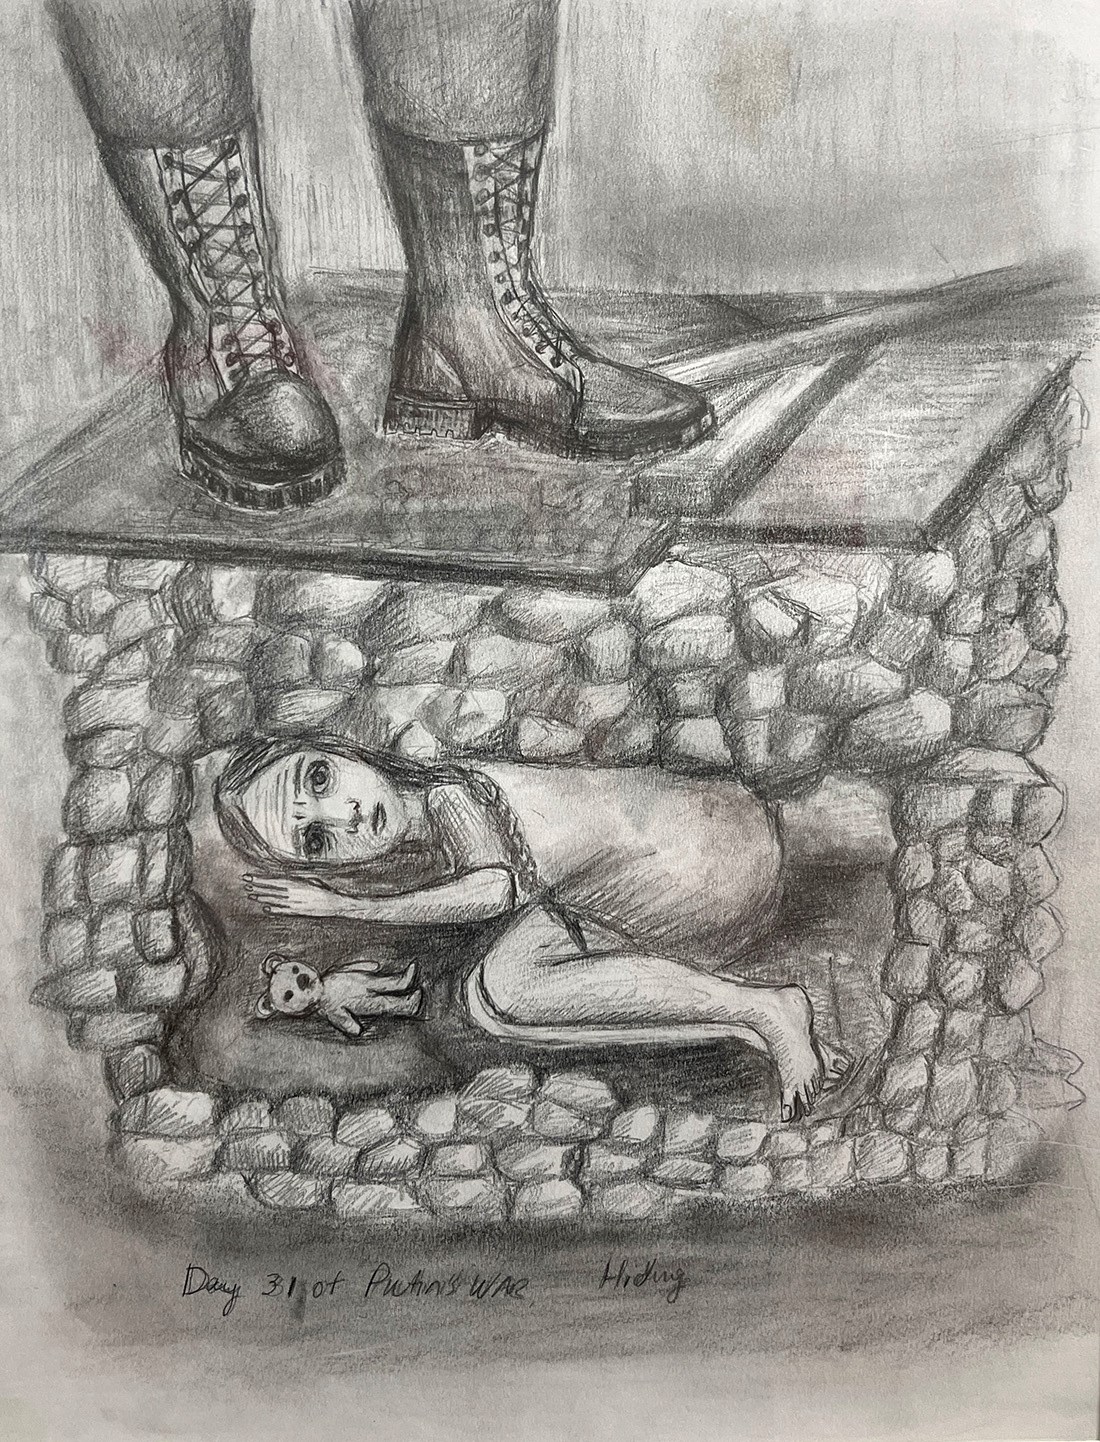 Hanna Melnyczuk, Day 31 of Putin’s War: Hiding, pencil on paper, 2022. Image shows legs with military boots standing above small child curled with teddy bear and hidden below ground.